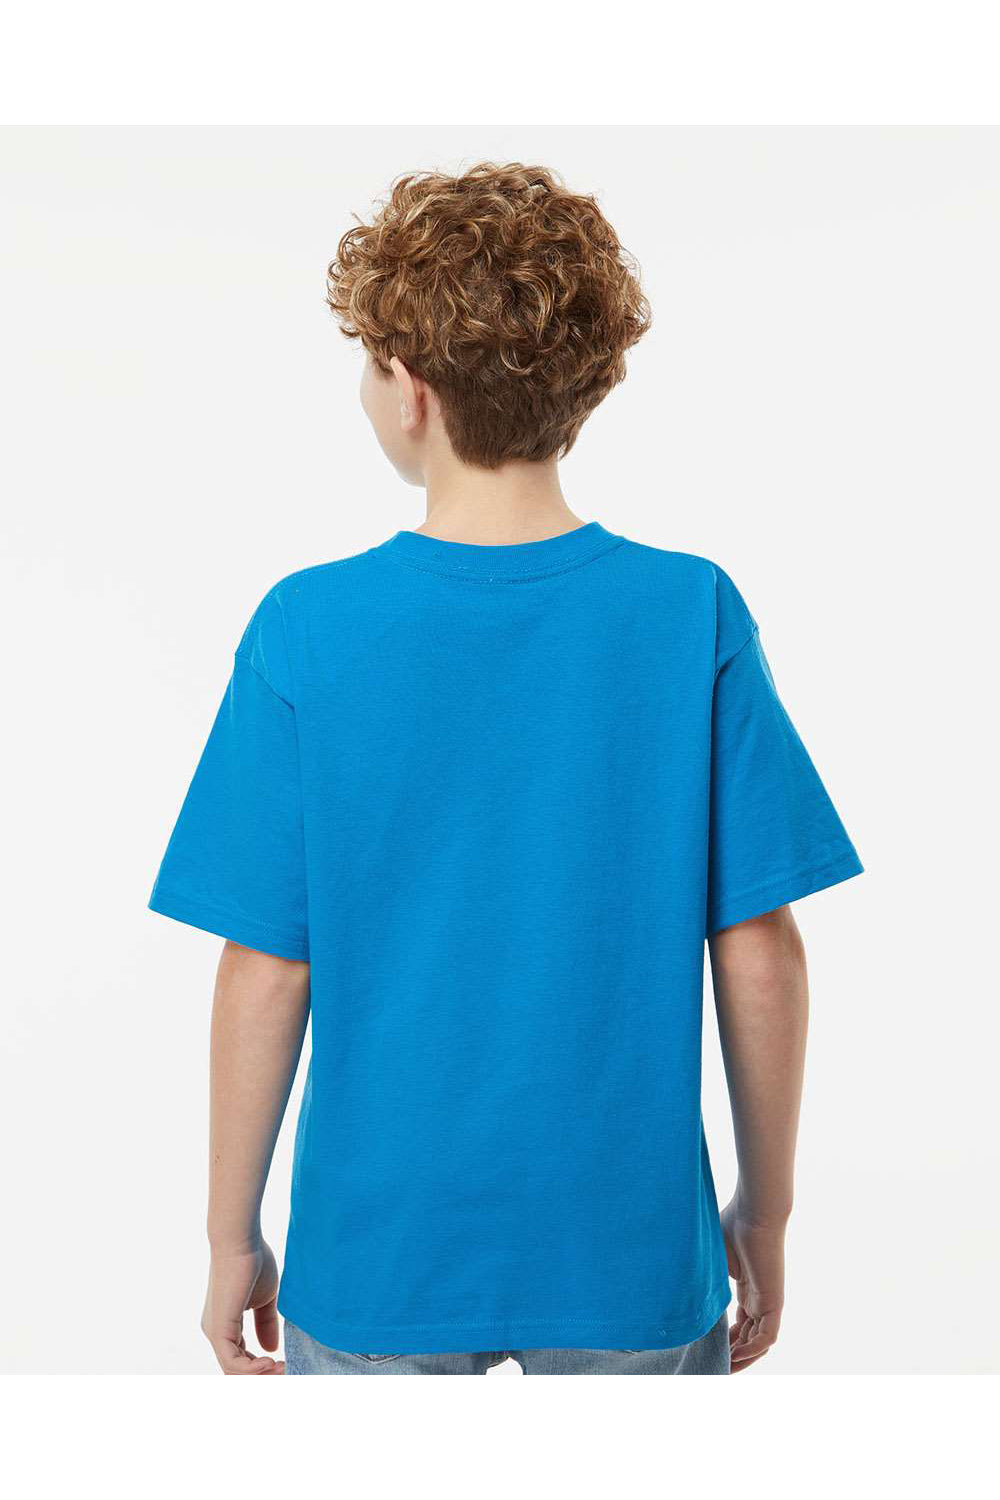 M&O 4850 Youth Gold Soft Touch Short Sleeve Crewneck T-Shirt Turquoise Blue Model Back